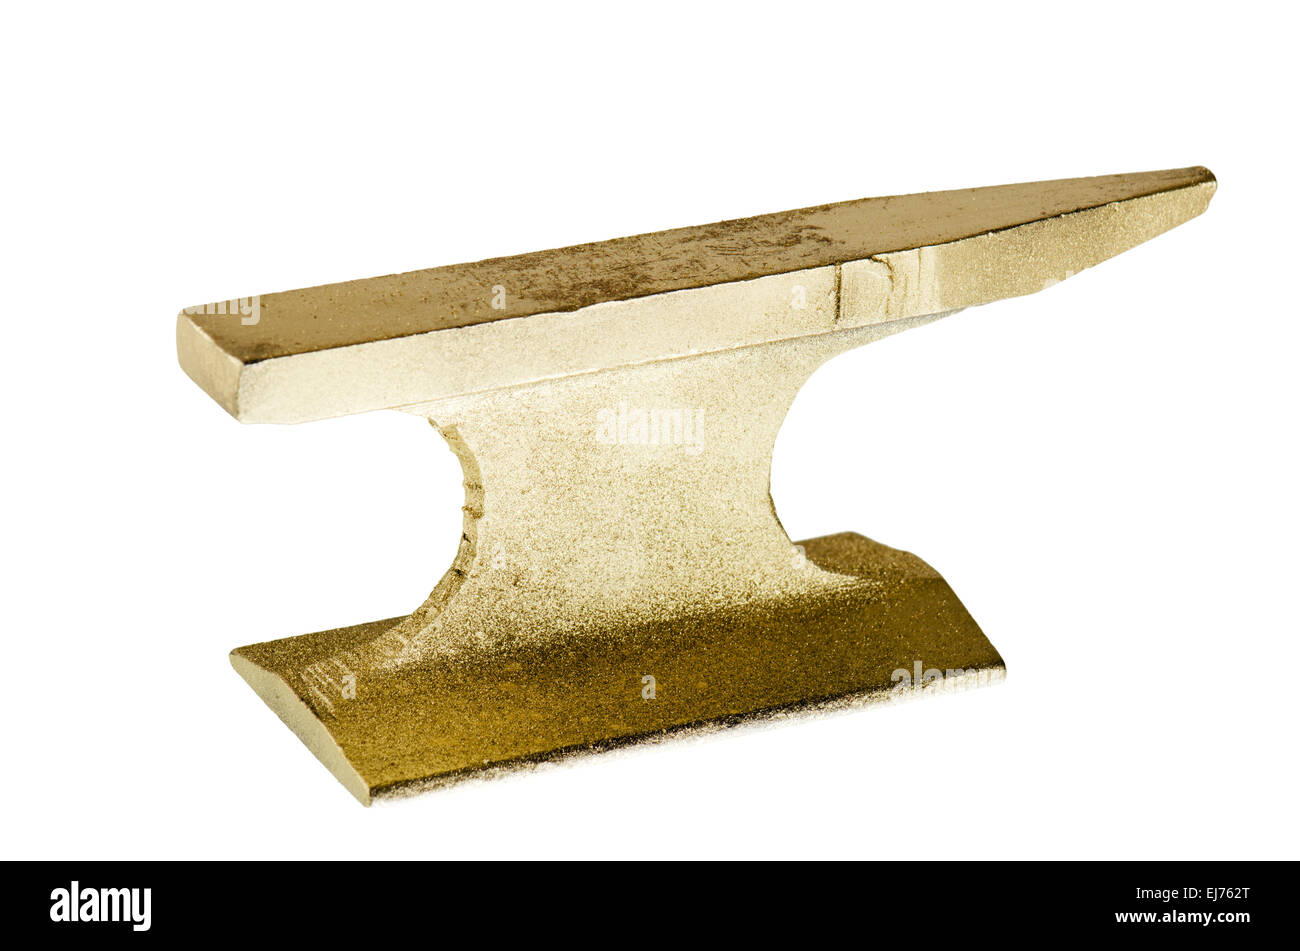 Gold anvil, isolated on white Stock Photo